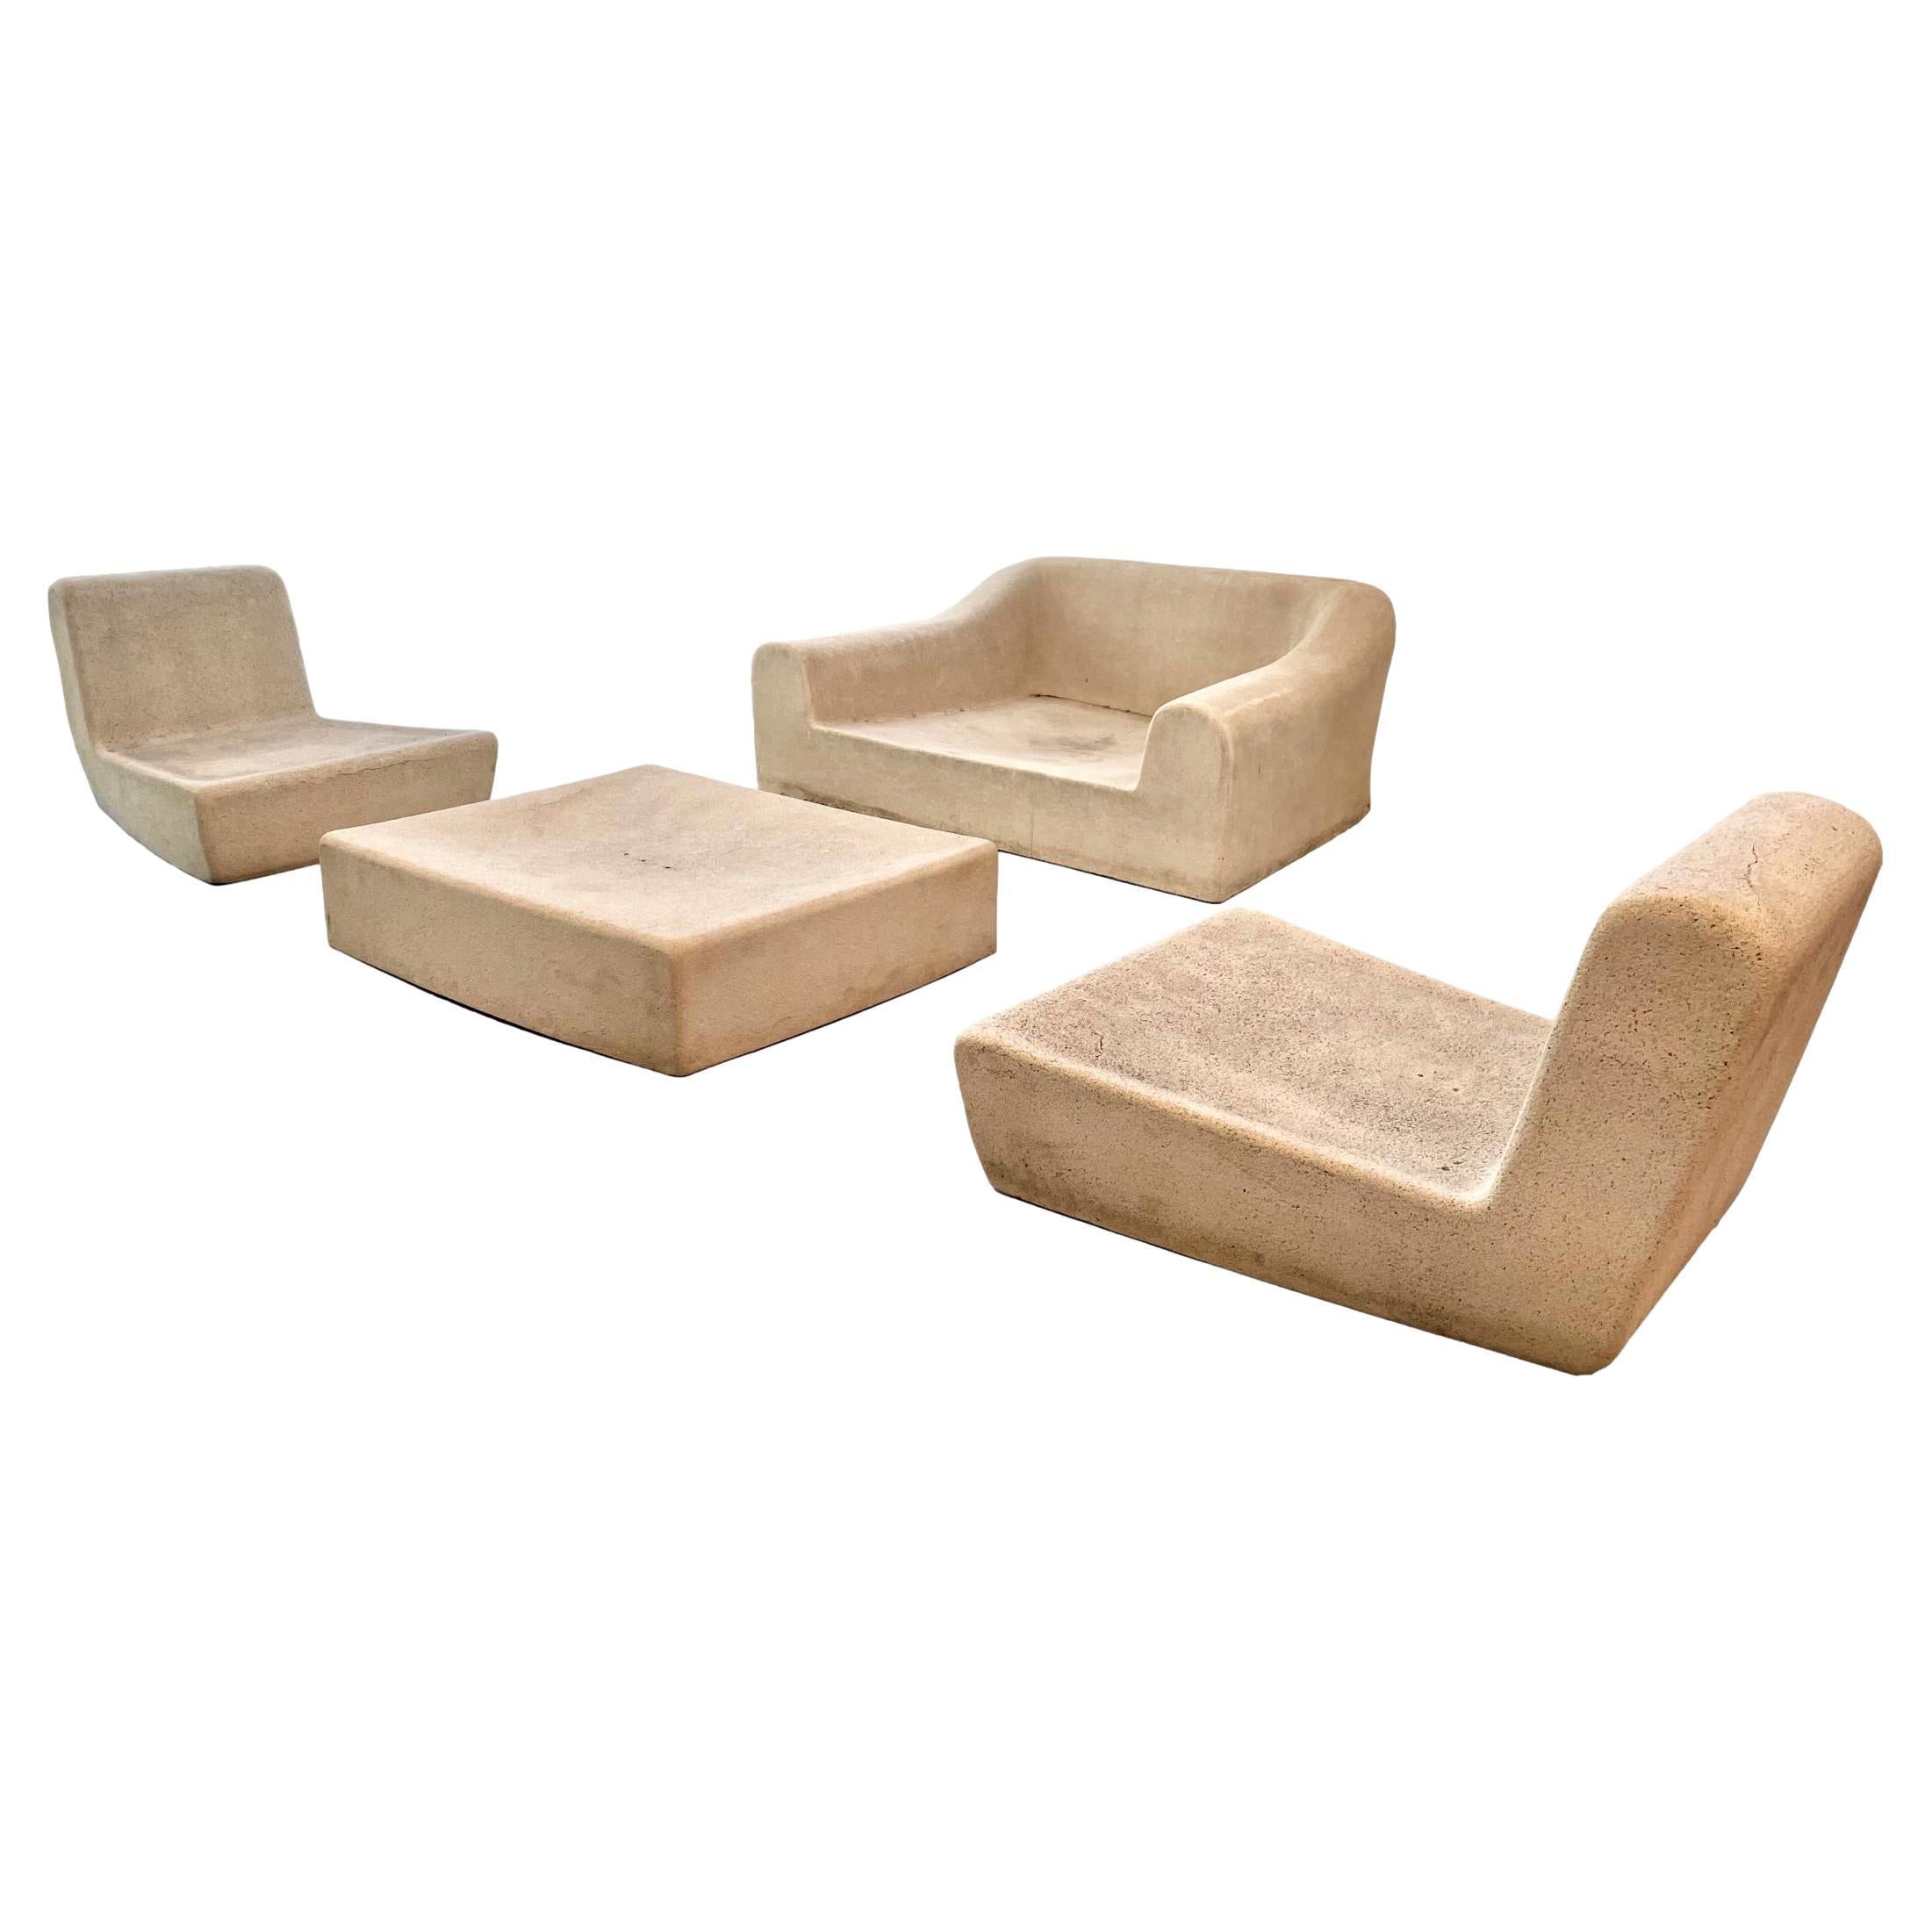 Michael Taylor Concrete and Resin Outdoor Furniture Set, 1970s USA